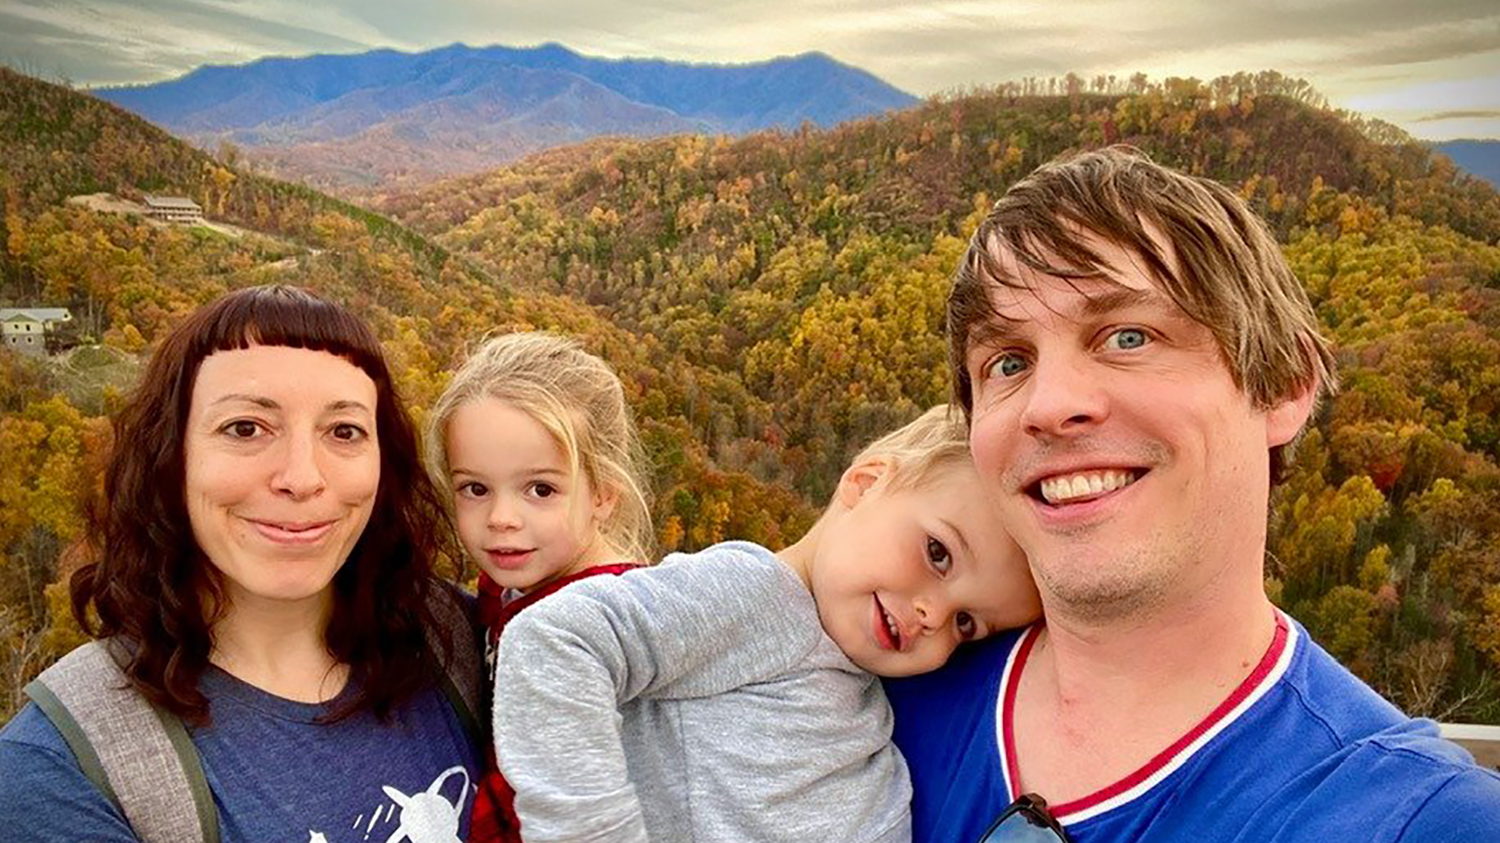 Laura Buker and her family posed in front of the Great Smoky Mountains